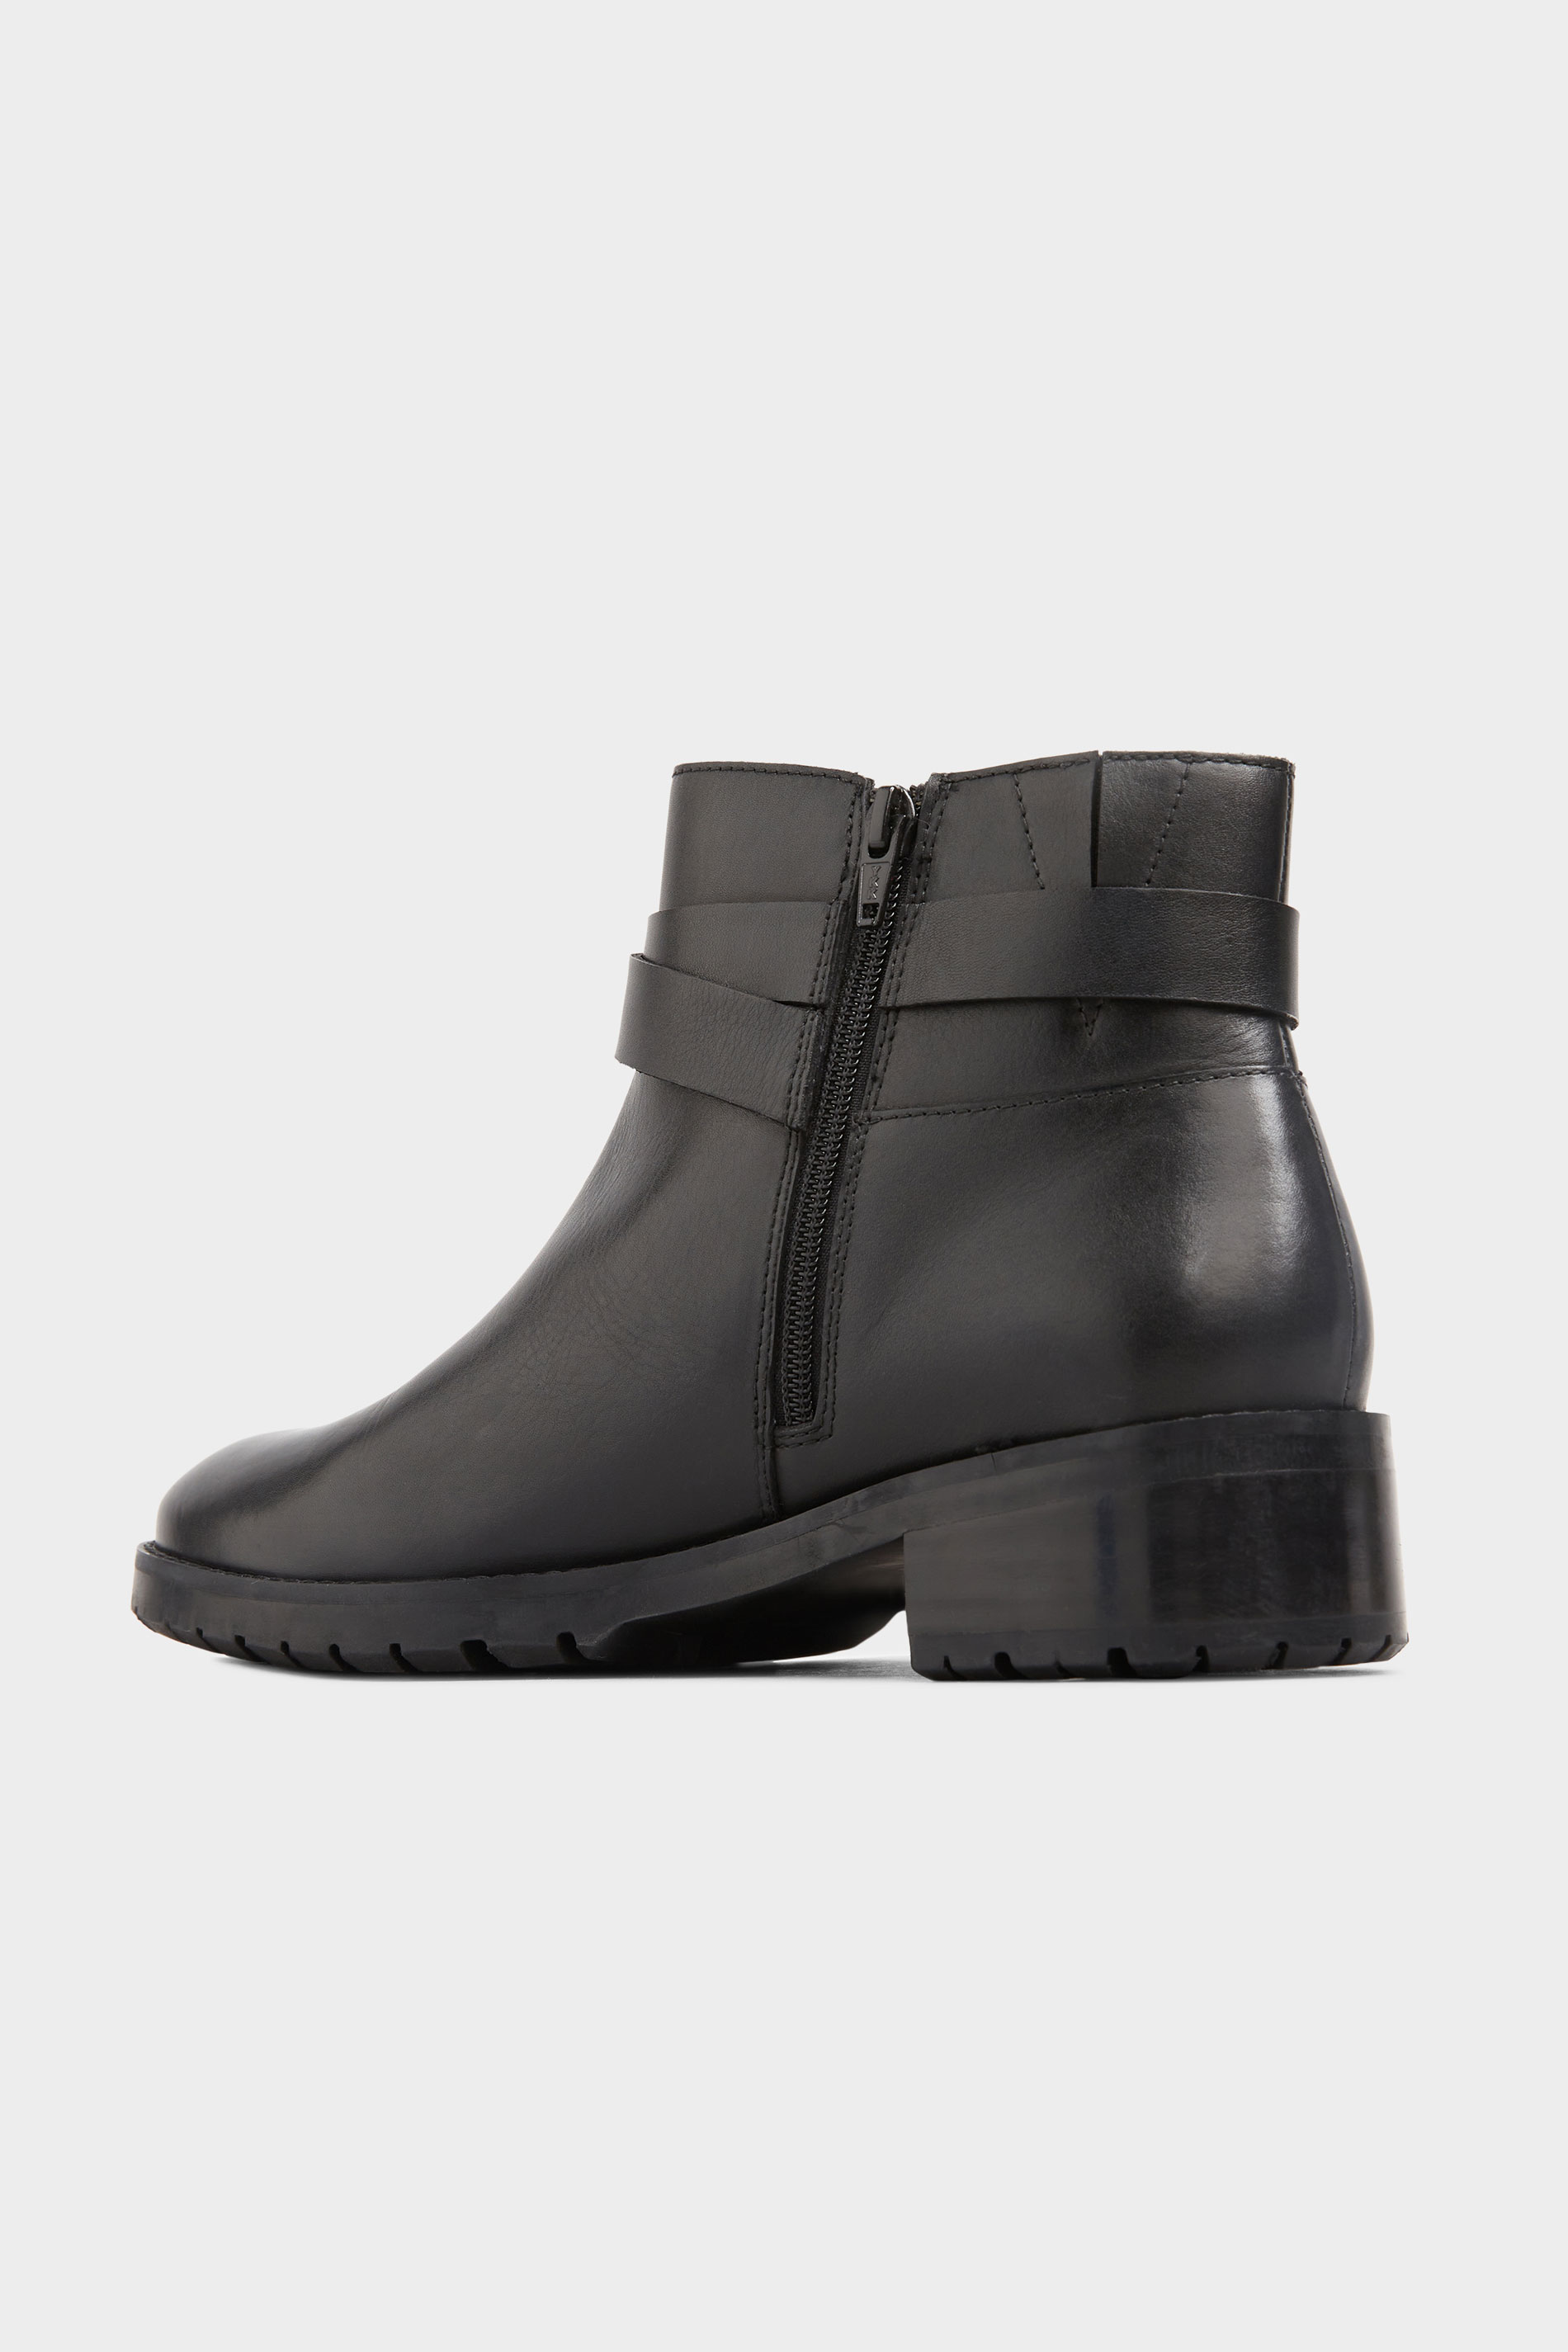 Black Leather Buckle Ankle Boots In Extra Wide Fit | Yours Clothing